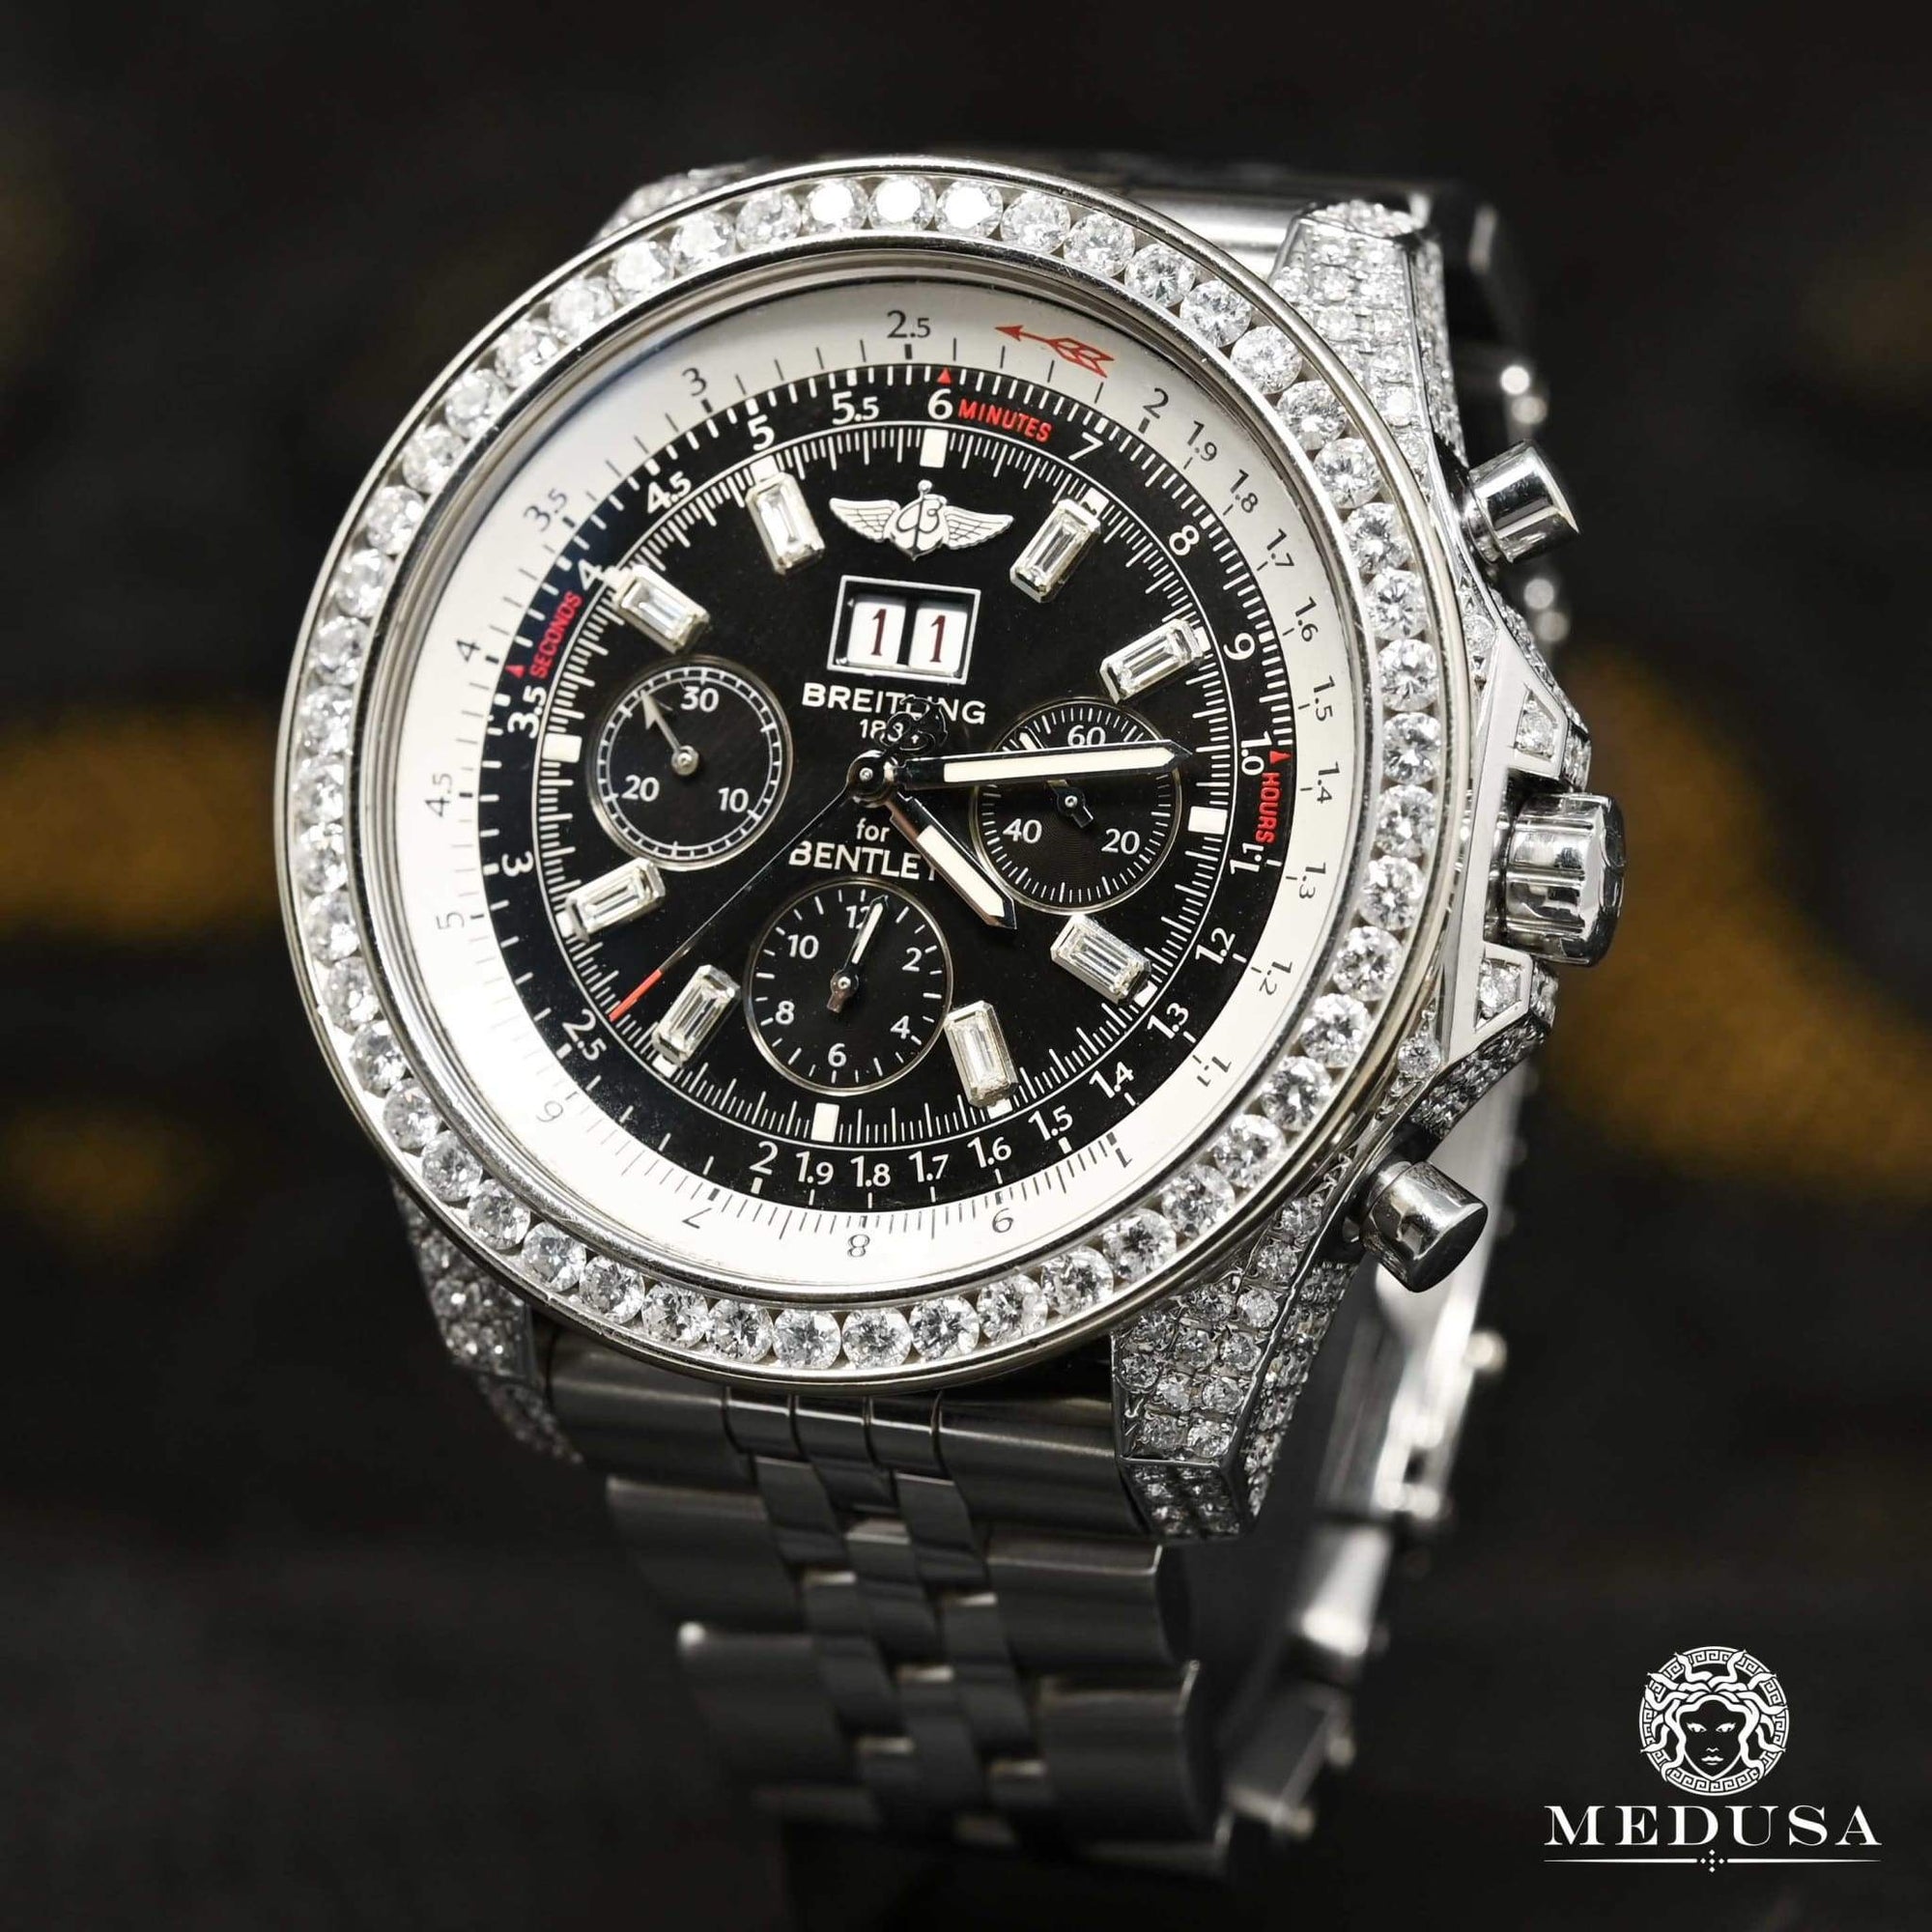 Breitling watch | Breitling for Bentley Men's Watch - Black Iced Stainless